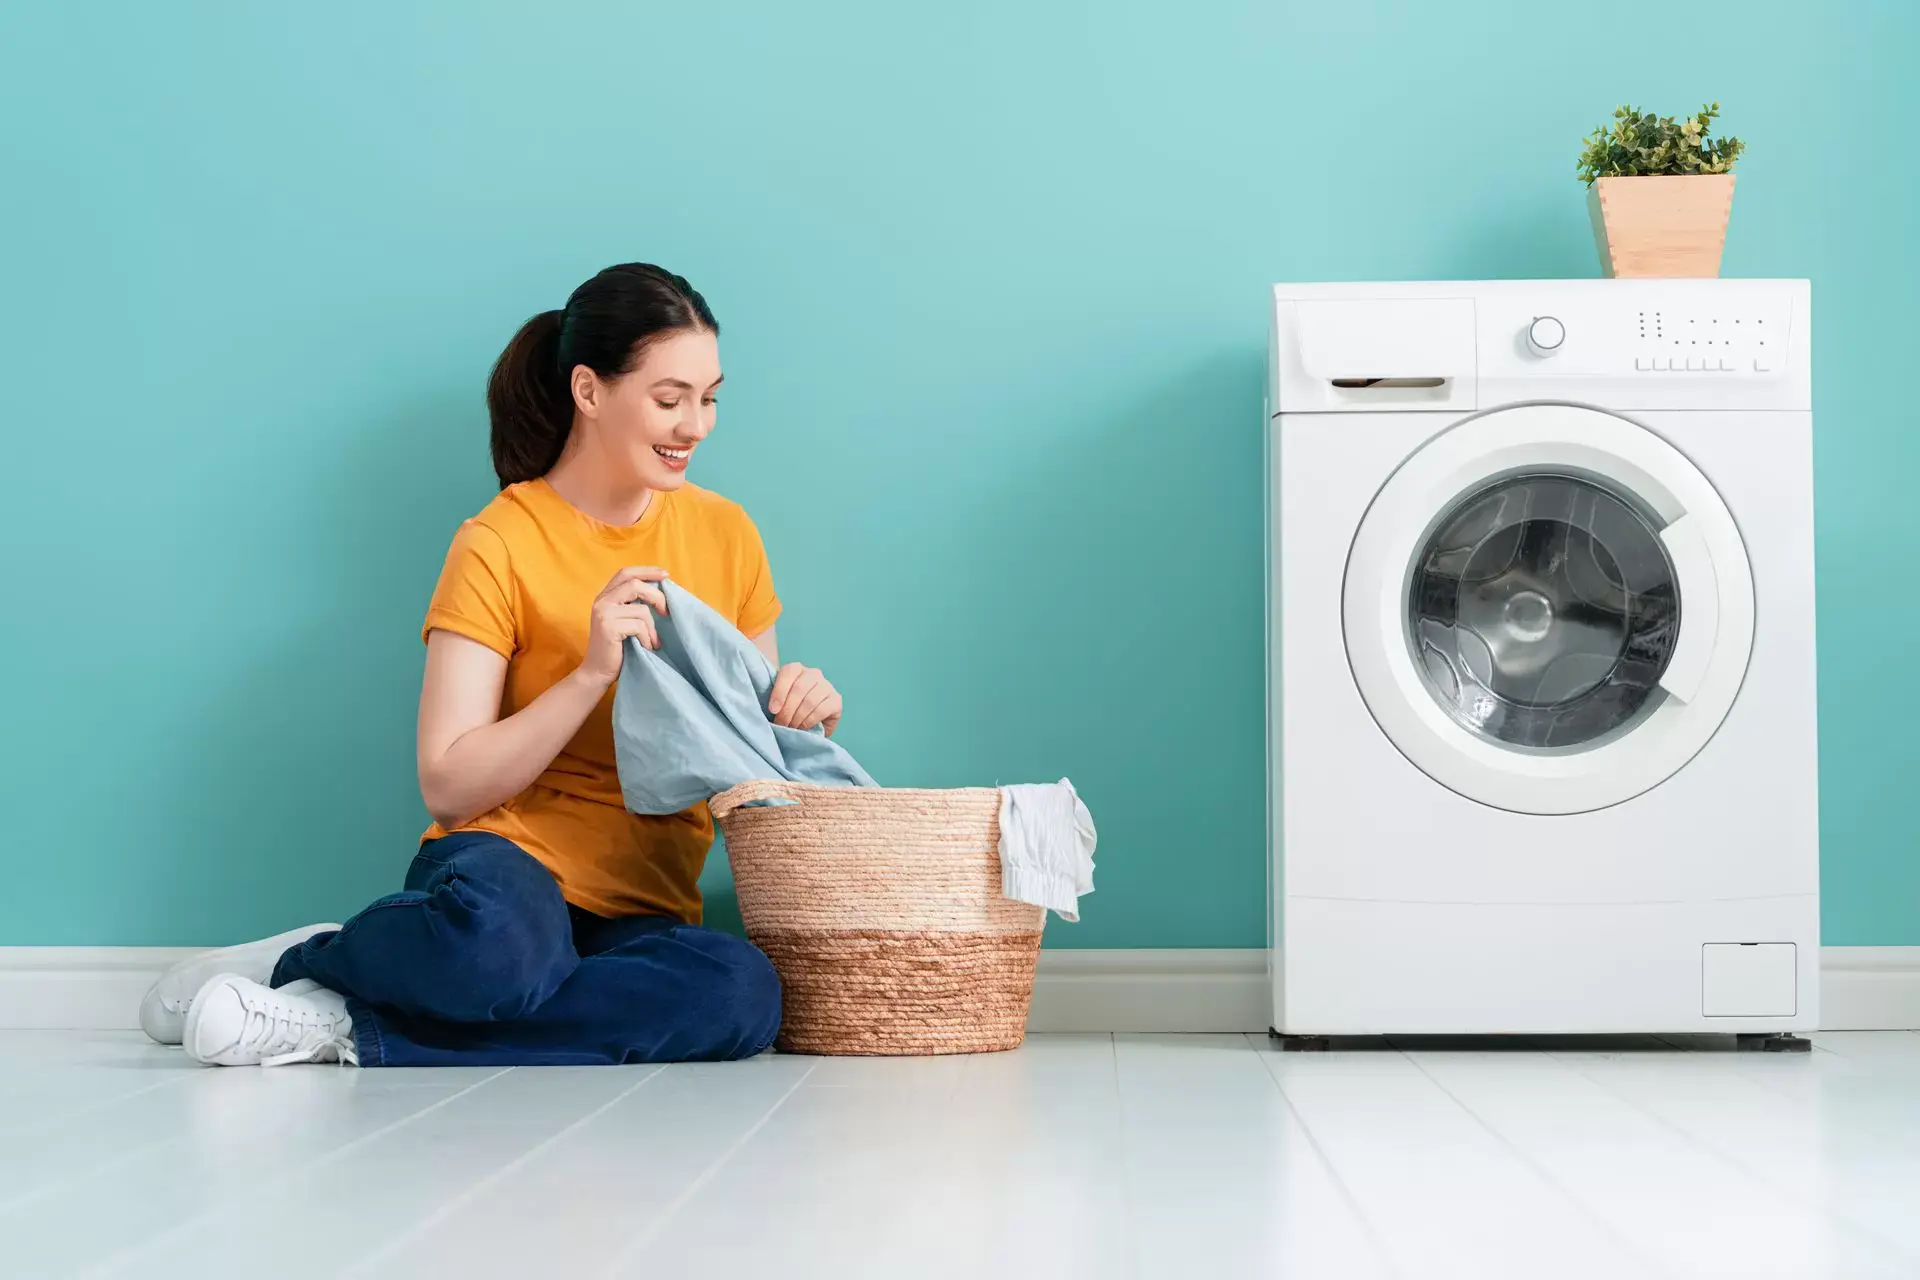 Discover how to wash your clothes without detergent